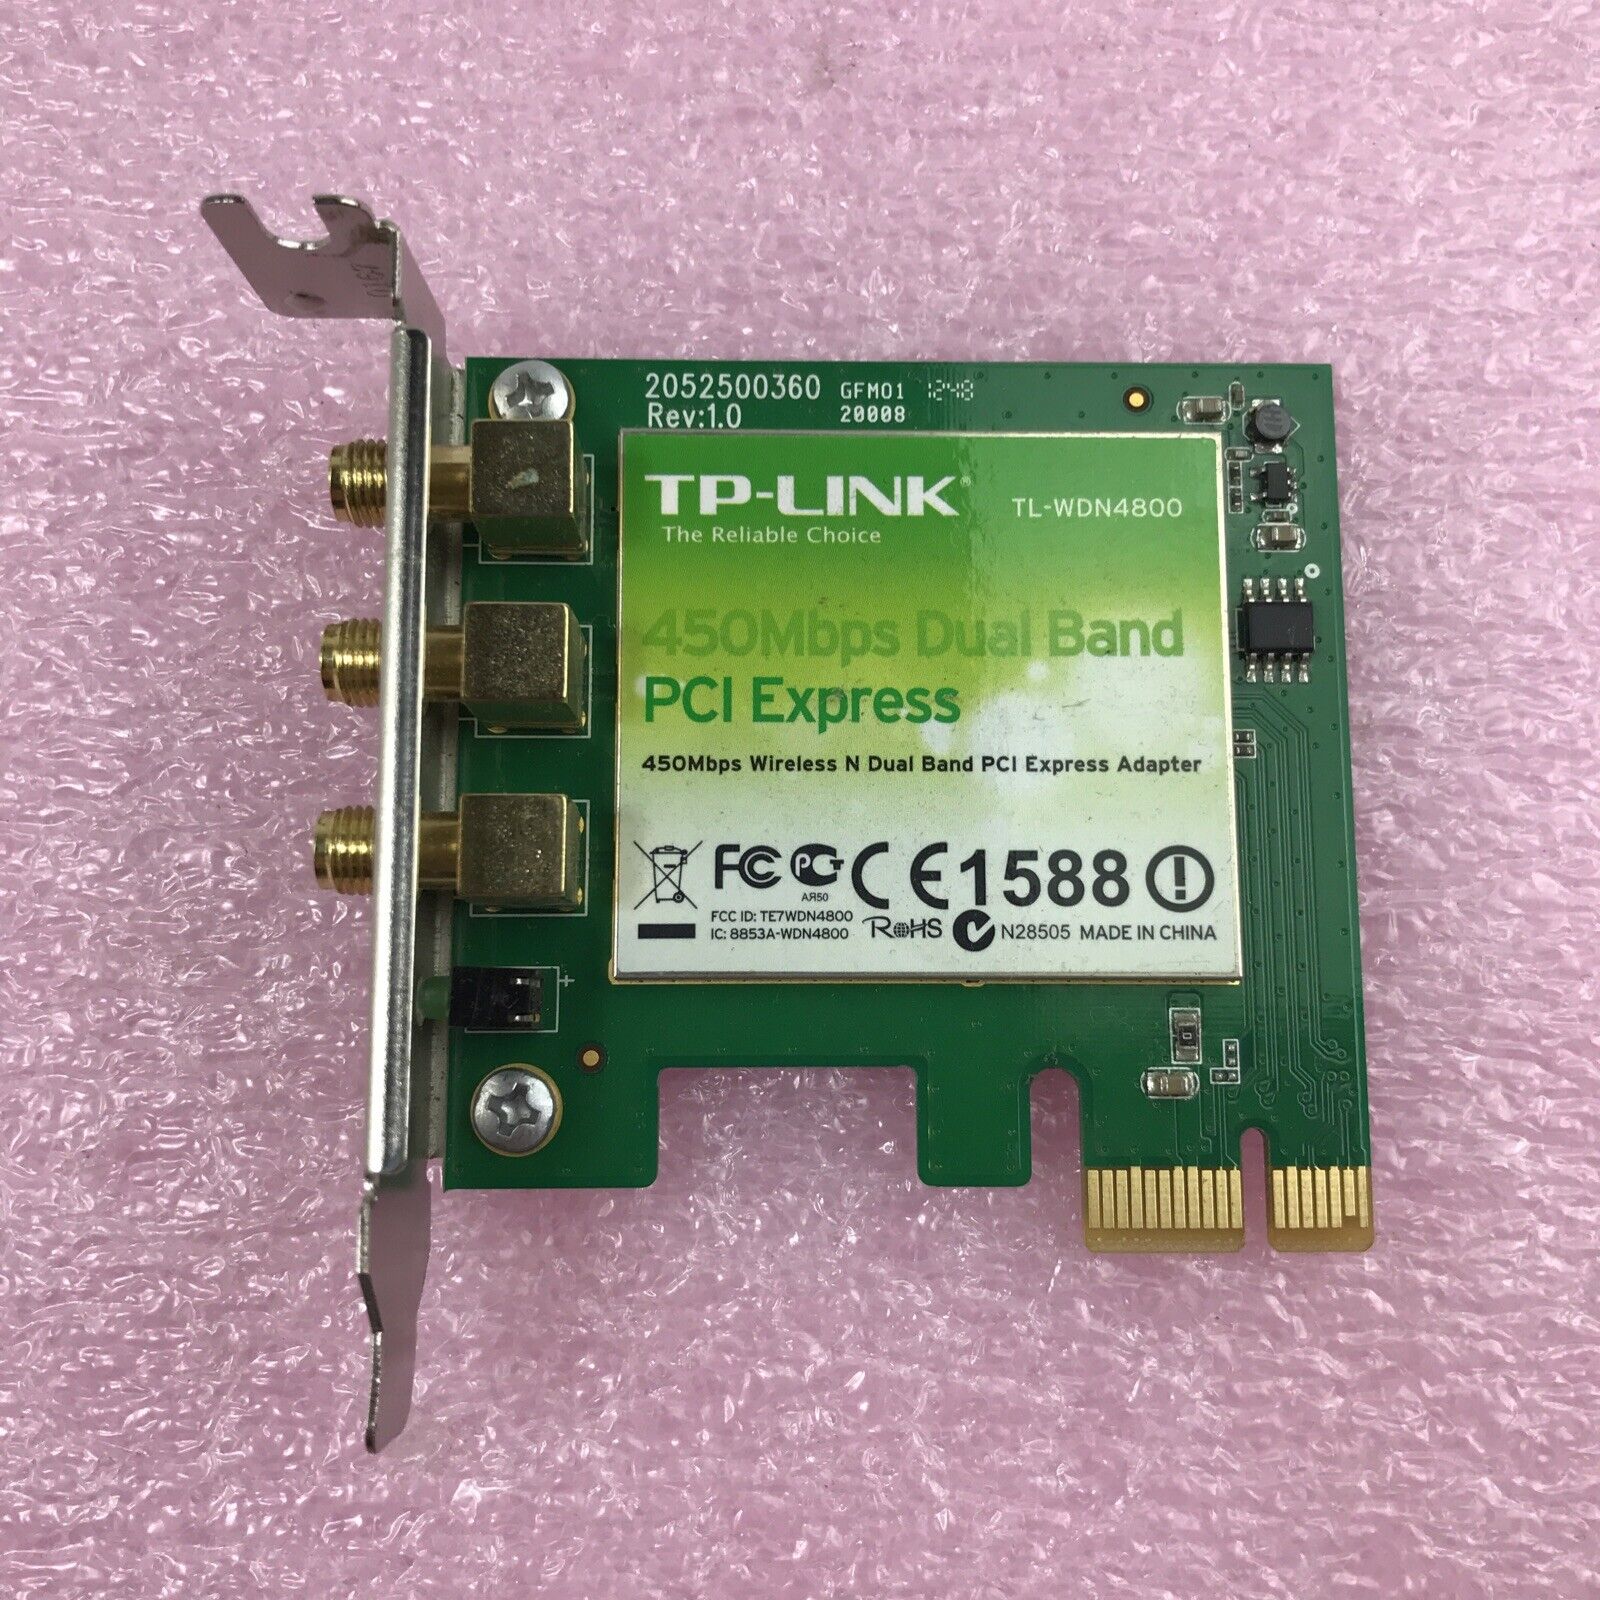 TP-Link TL-WDN4800 Wireless Dual Band PCI Card Adapter